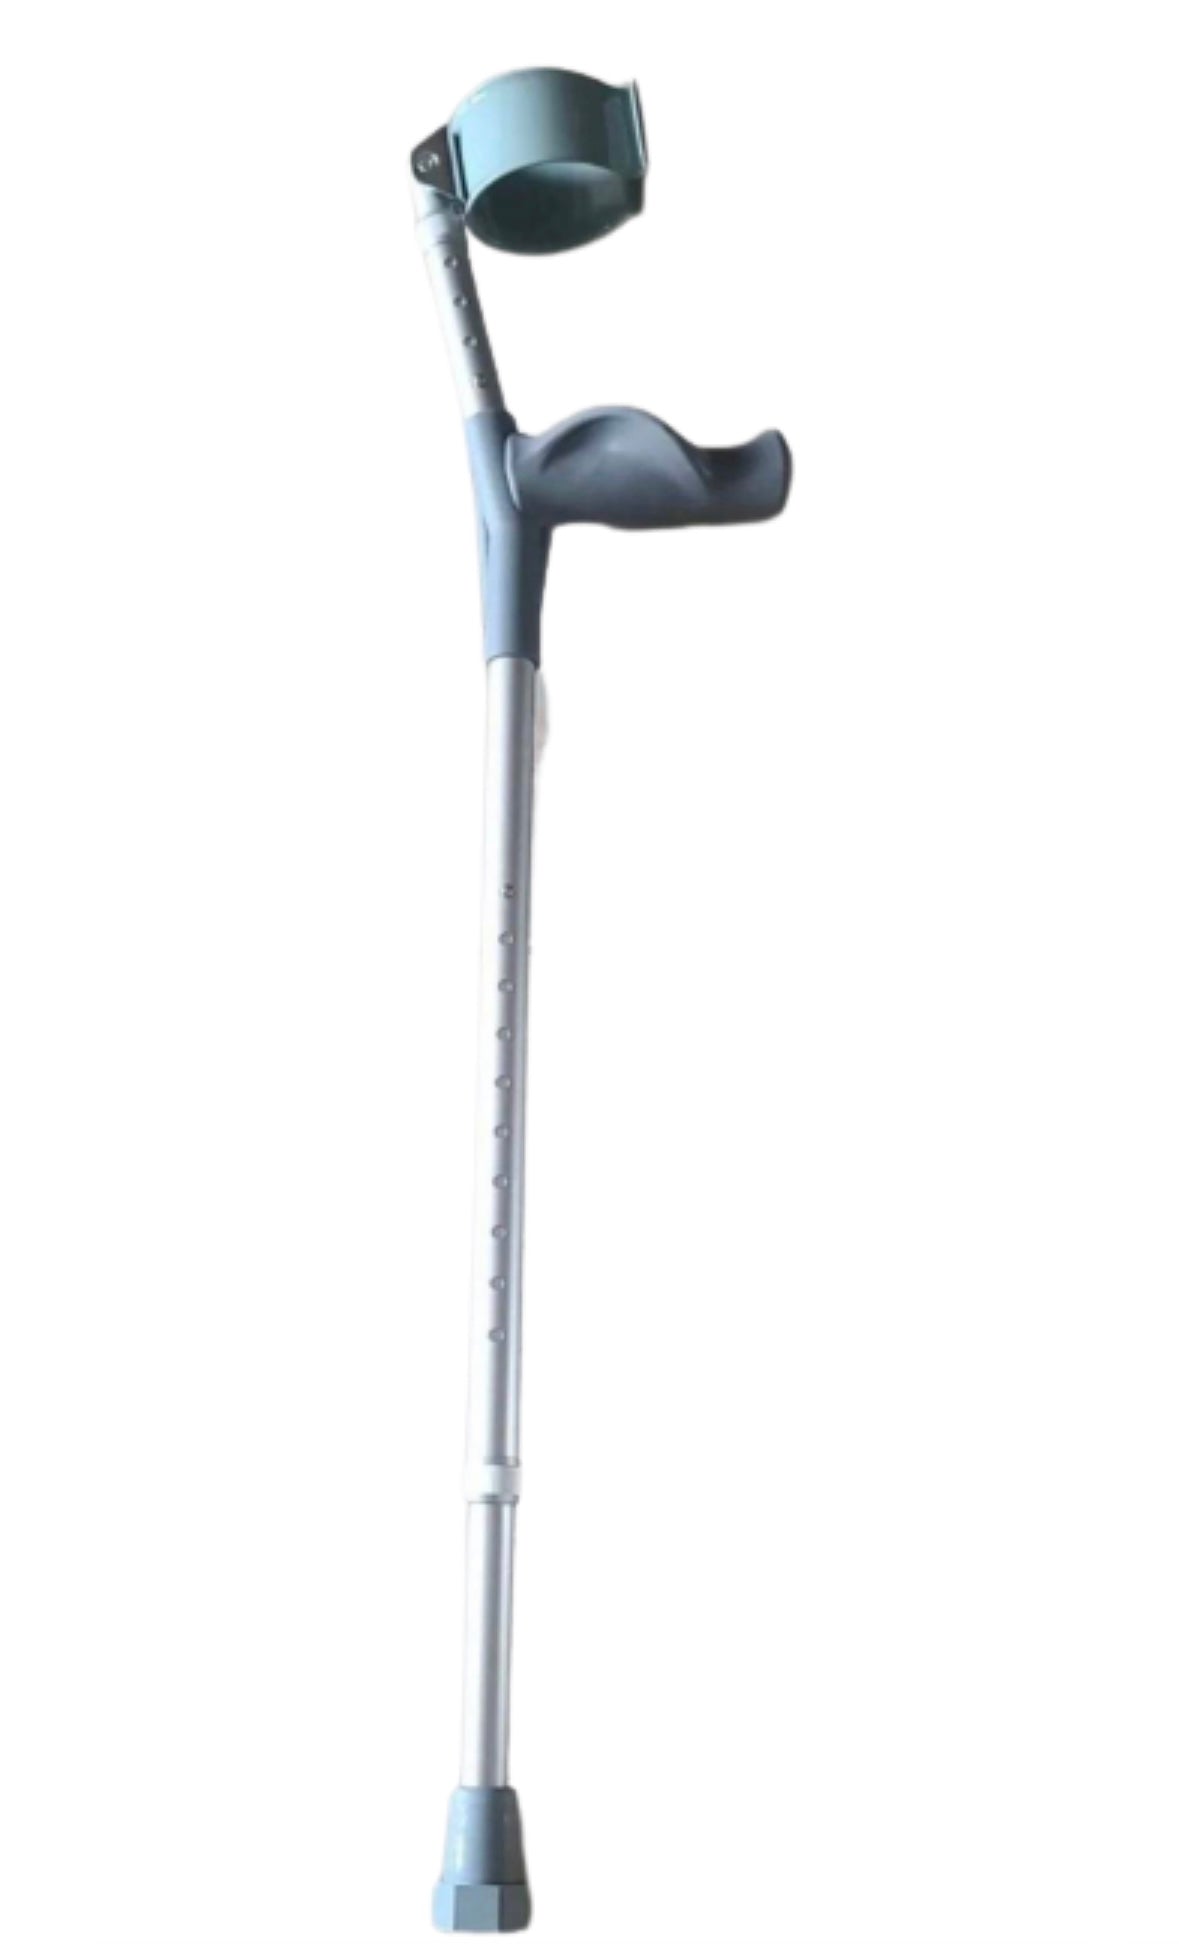 HOUSE:  Dr. Gregory House Silver Metal Cane